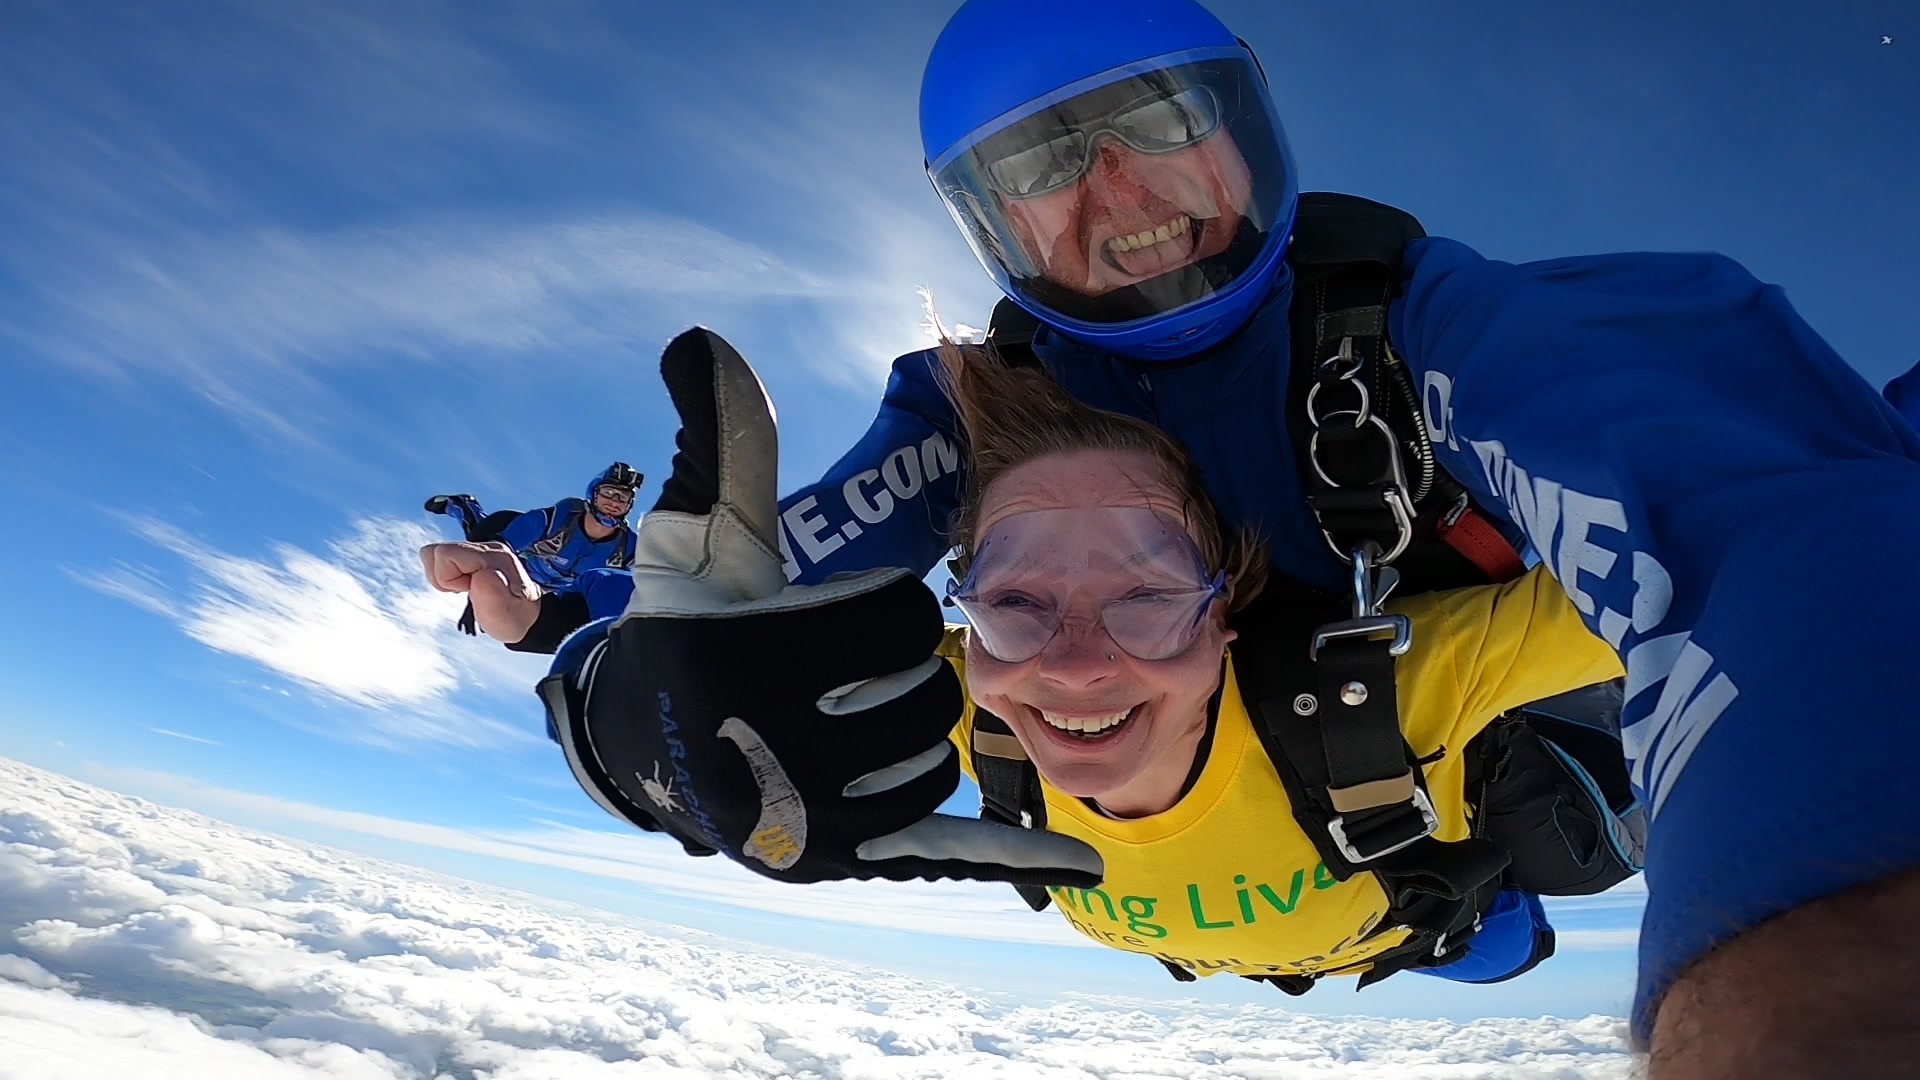 Charity Skydiver and instructor in freefall